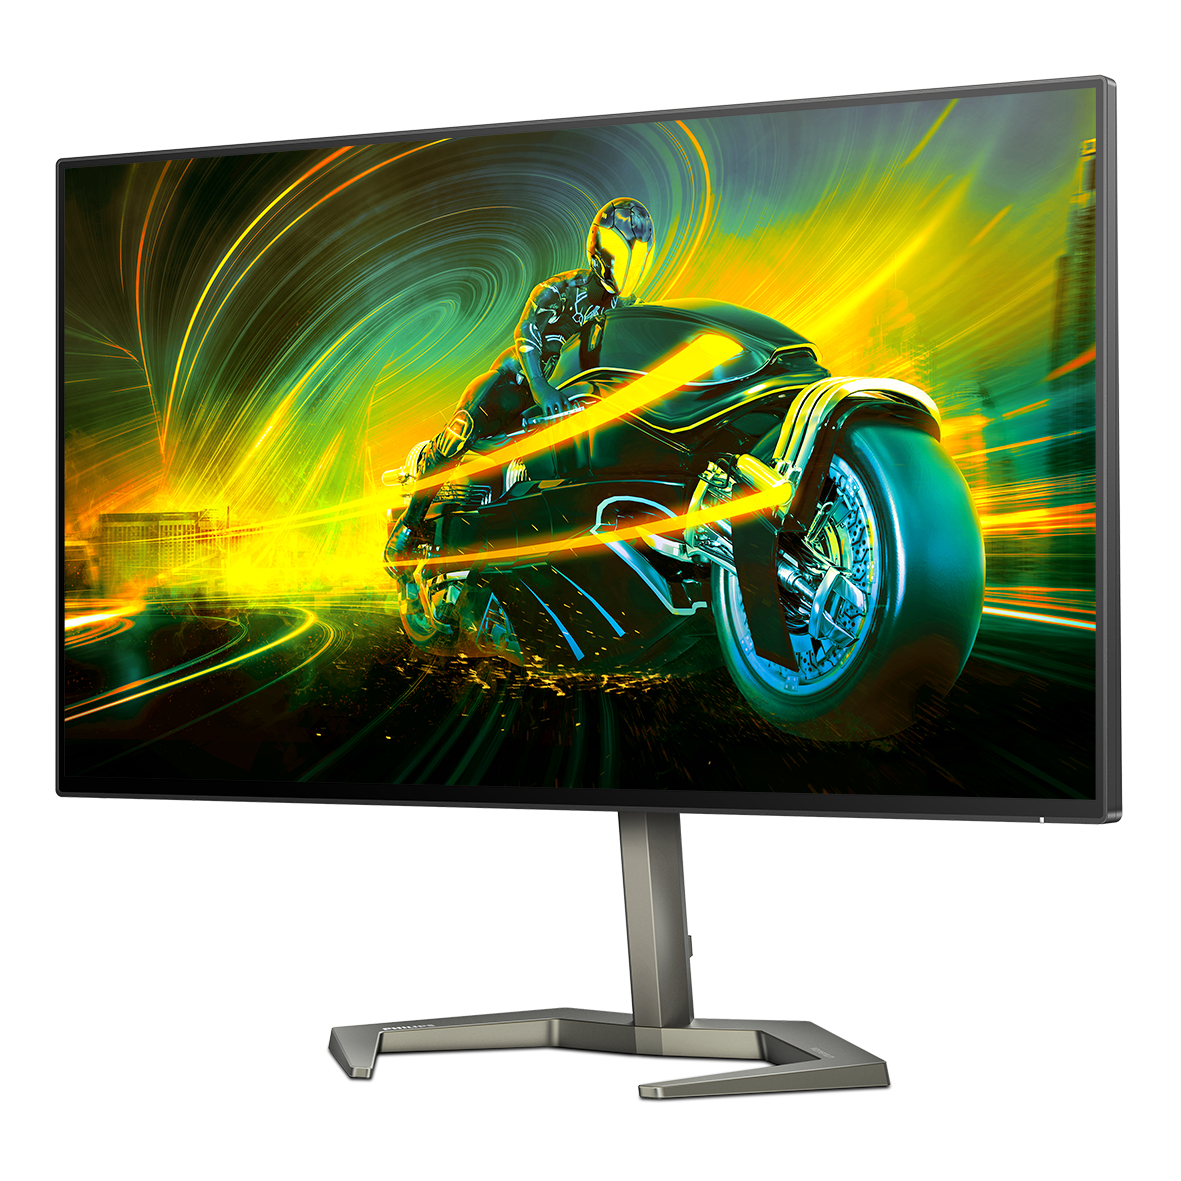 Inspiratie zuur bende Philips Momentum 5000 27M1F5500P: 27-inch, 240 Hz and VESA DisplayHDR 600  gaming monitor announced with a 2.5K resolution - NotebookCheck.net News